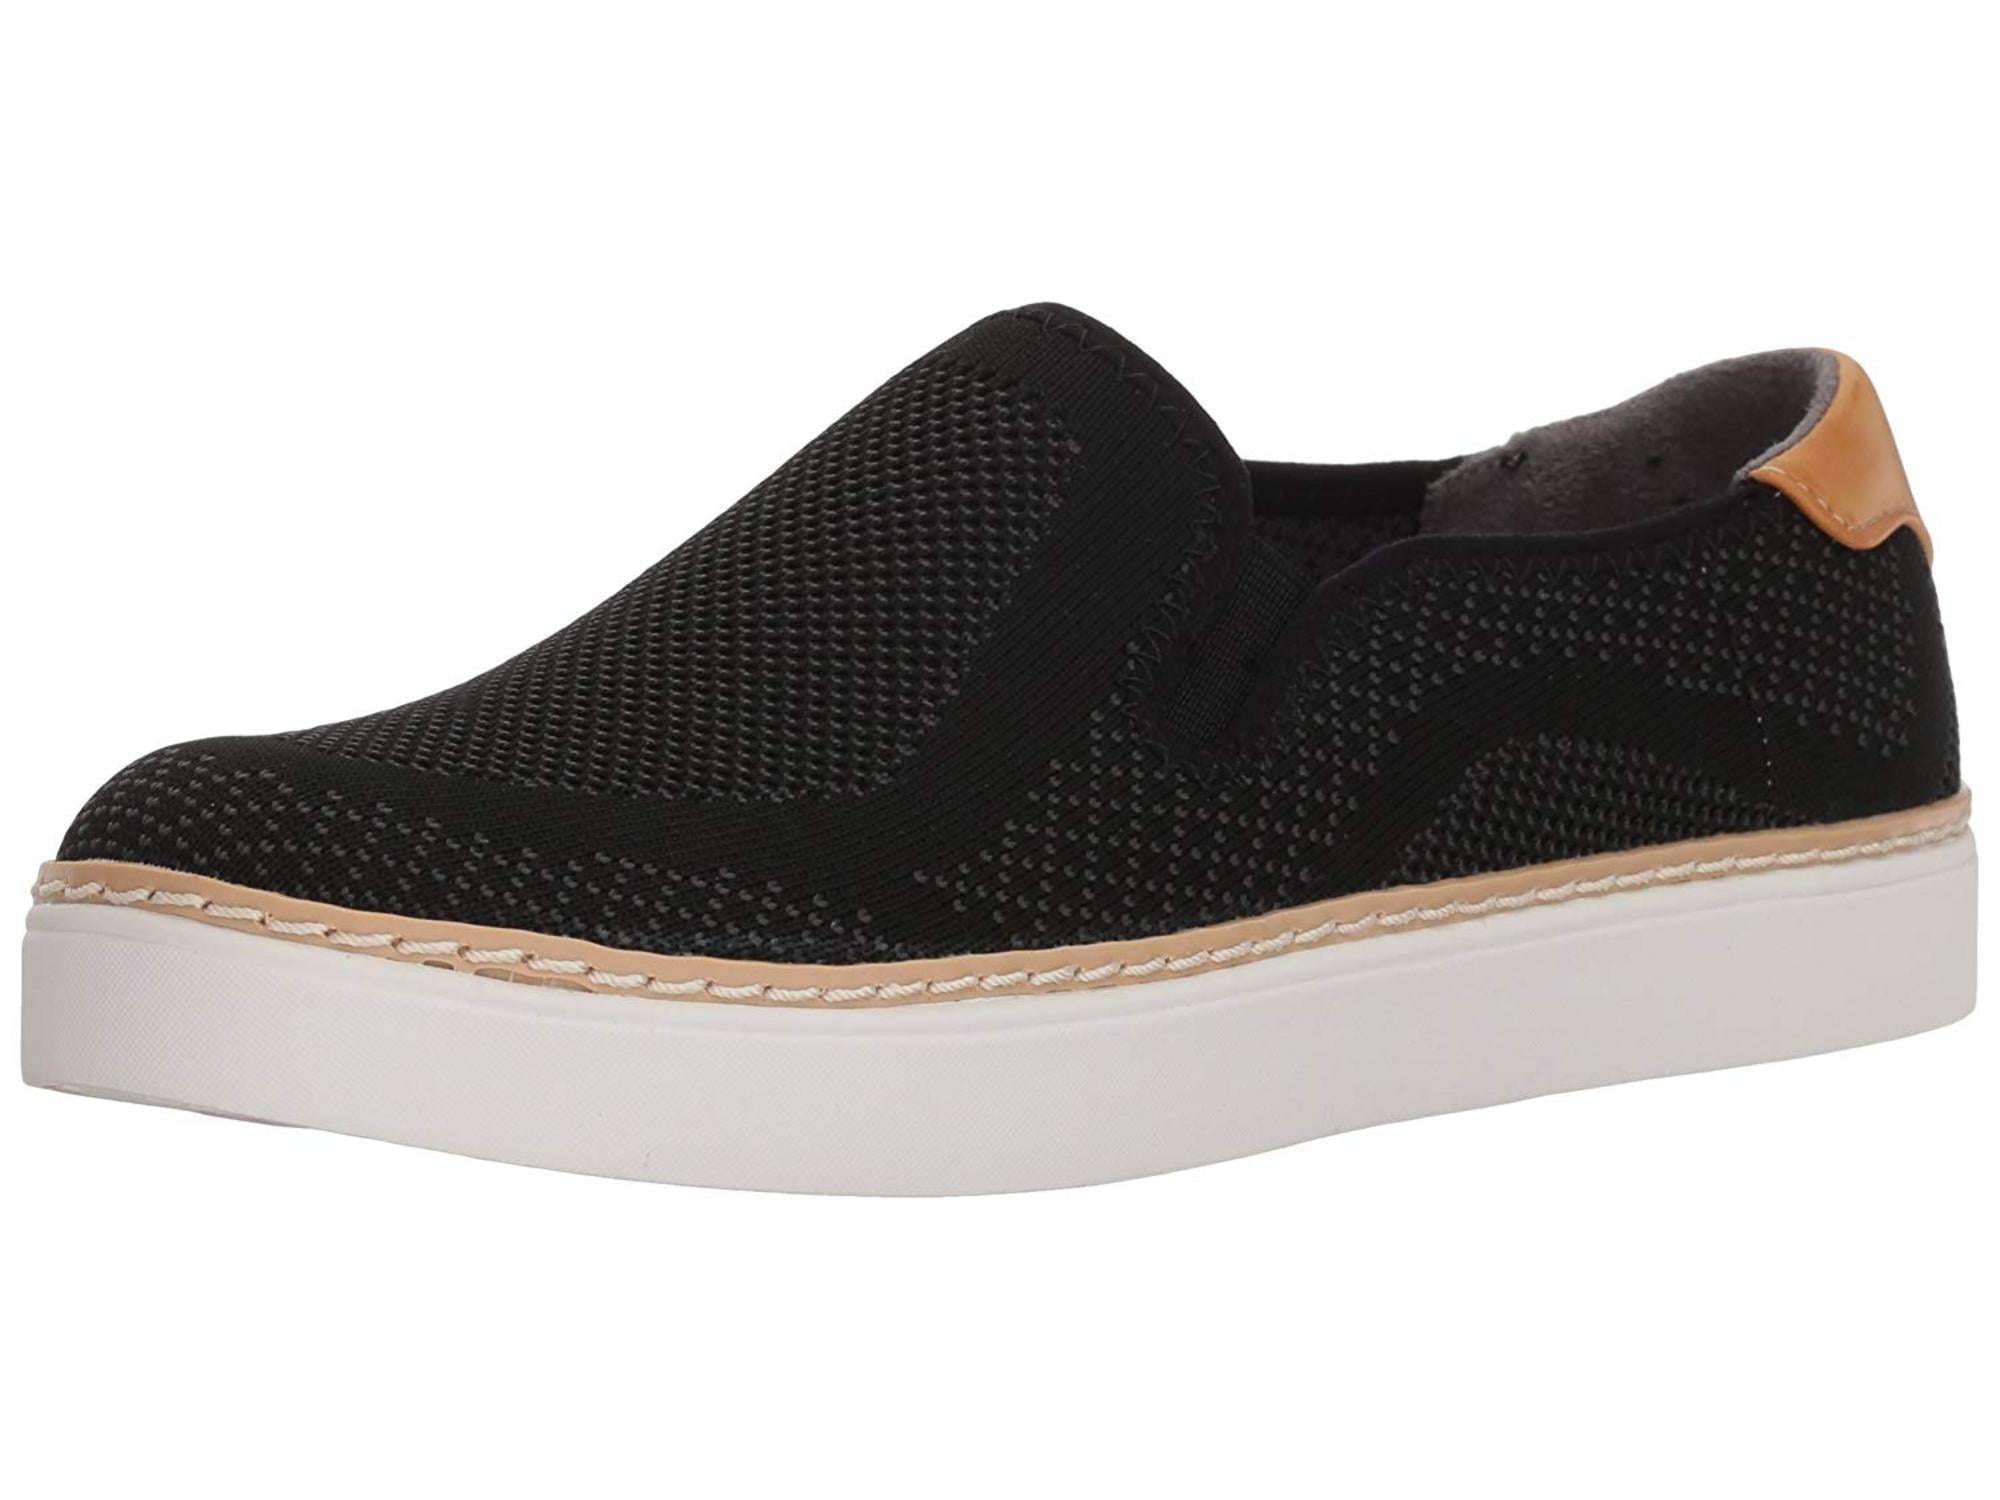 Shoes Womens Madi Knit Fabric Low 